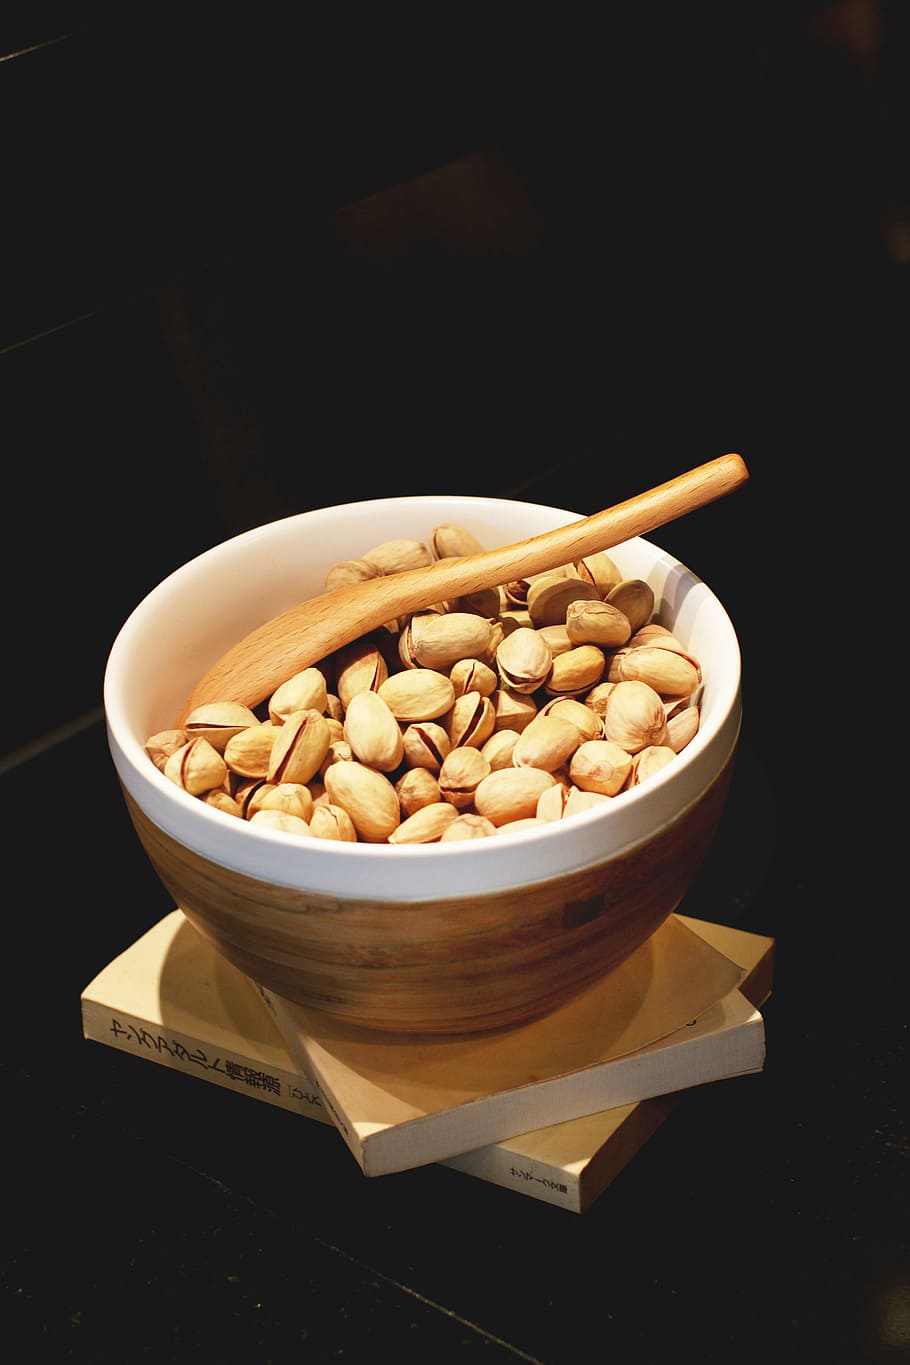 brown, nut, white, bowl, pistachio, food, black, food and drink, healthy eating, indoors